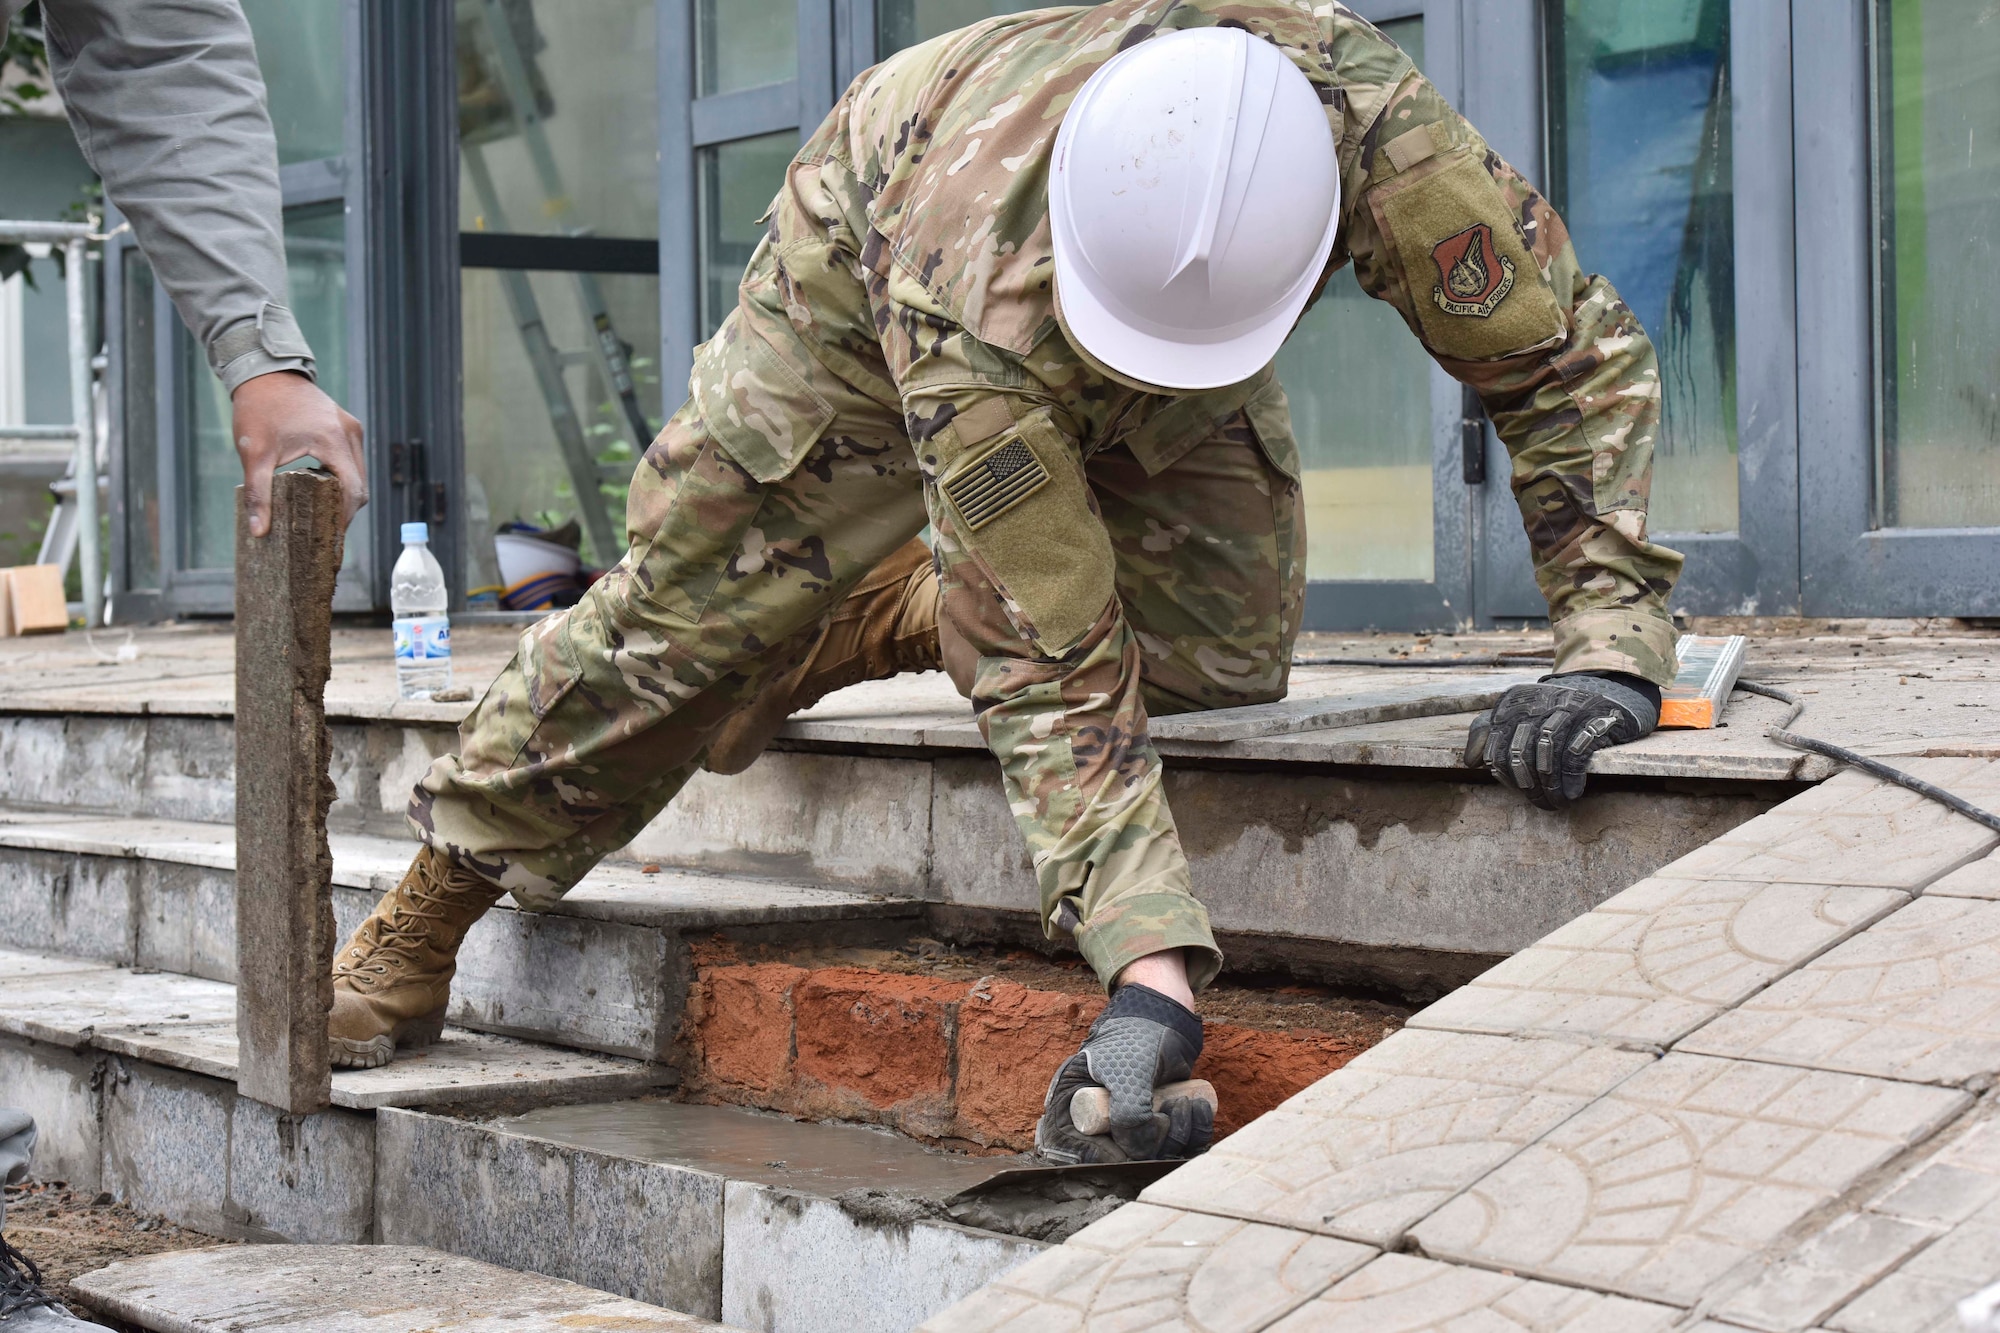 A U.S. Air Force civil engineer repairs steps in front of a school, July 30, 2019, during Pacific Angel 19-3 in Bayangol Soum, Mongolia. PAC ANGEL is a multilateral humanitarian assistance civil military engagement, improving military-to-military partnerships in the pacific through medical health outreach, civic engineering projects and subject matter expert exchanges between U.S. service members, multinational militaries, nongovernmental organizations, and Mongolian military and civilian participants. (U.S. Air Force photo by Senior Airman Eric M. Fisher)